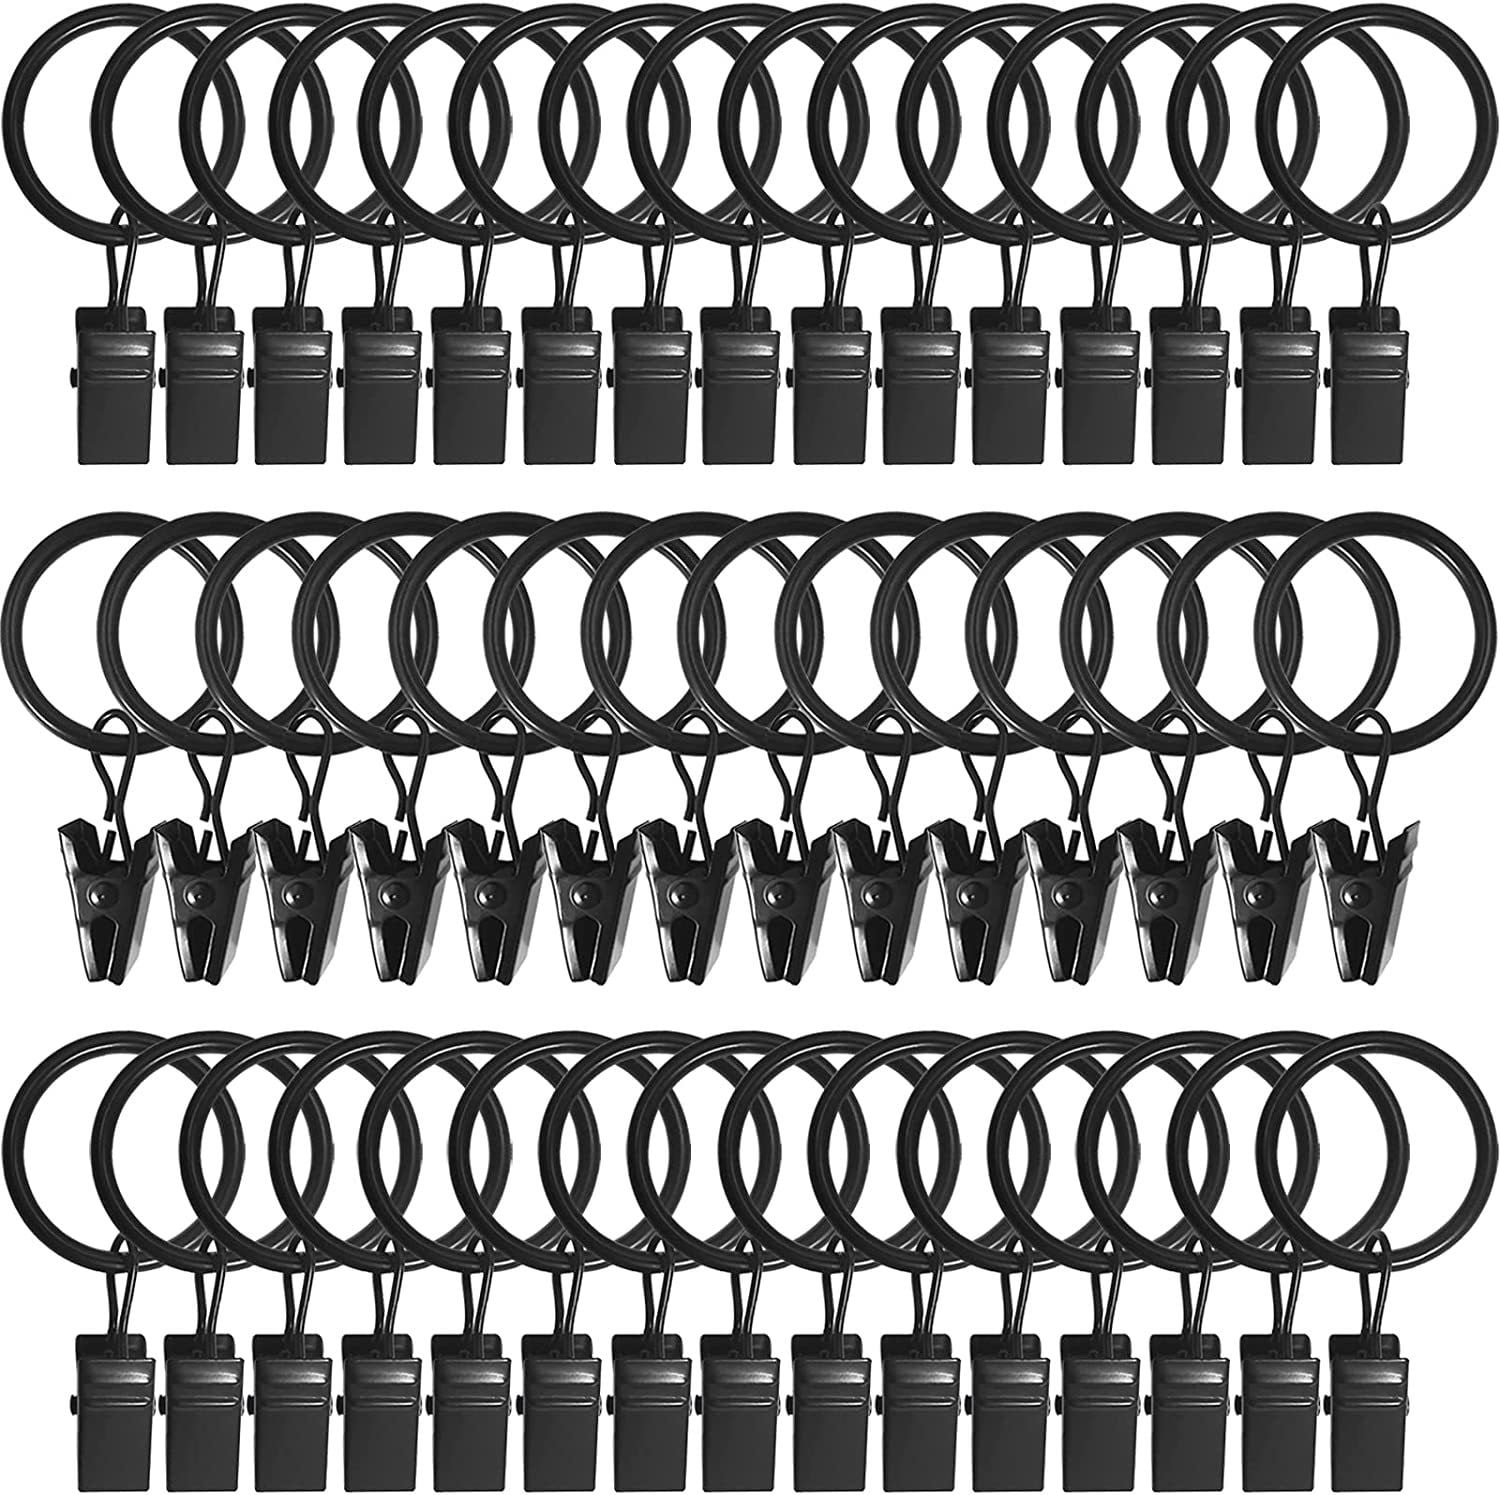 40pcs Curtain Rings with Clips Hooks 1.5 inch Rustproof Matte Metal  Stainless Steel Drapery Rings for Tension Rod Bracket Eyelets Decorative  Hangers